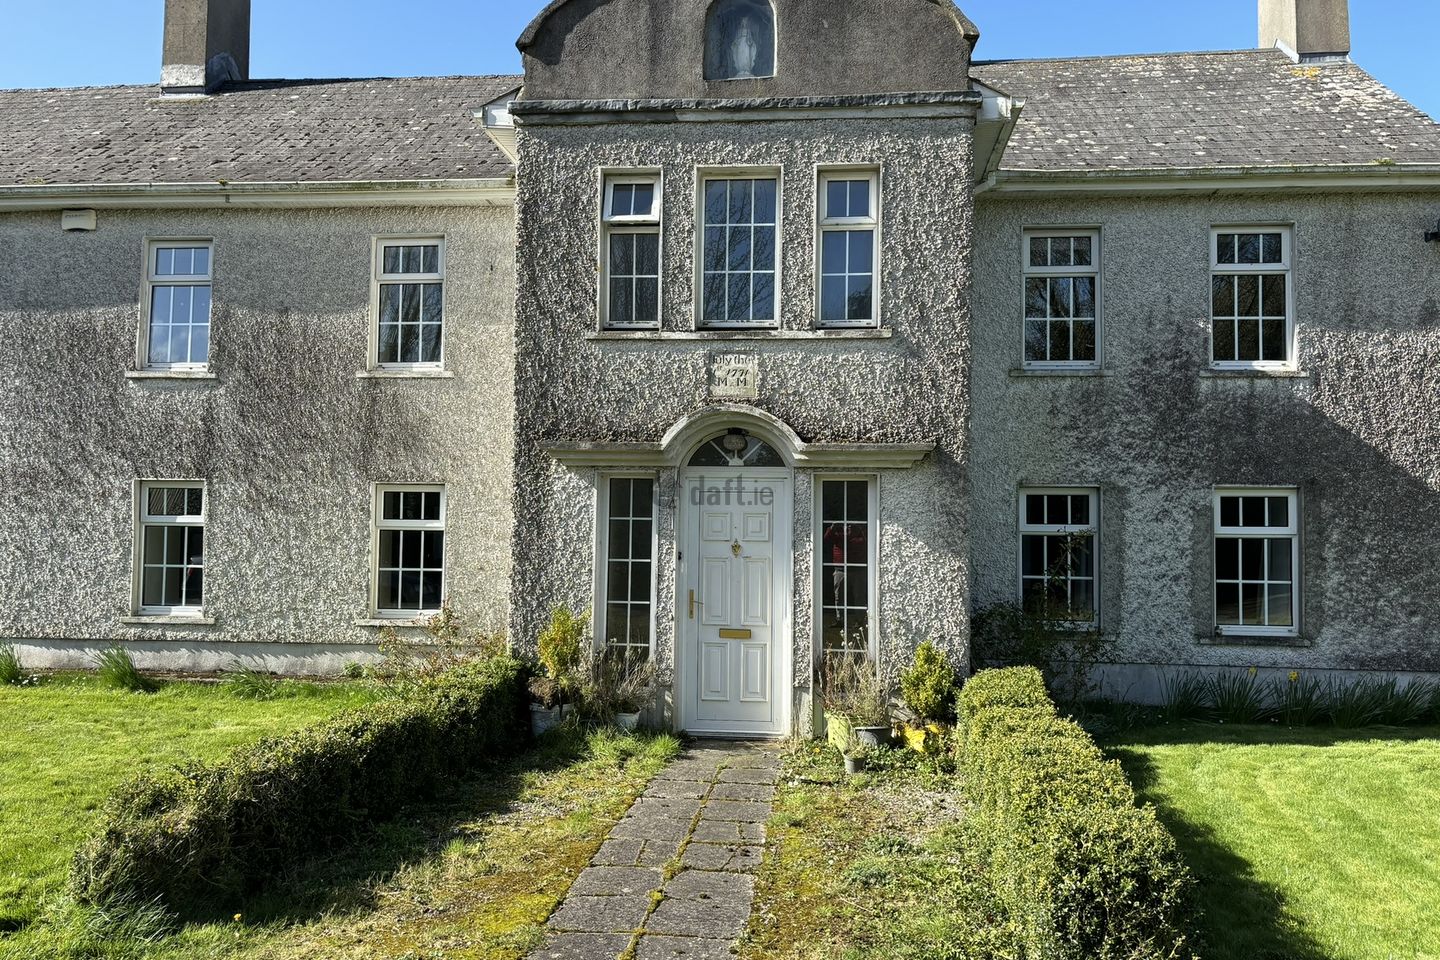 Rearymore House, Reary More, Clonaslee, Co. Laois